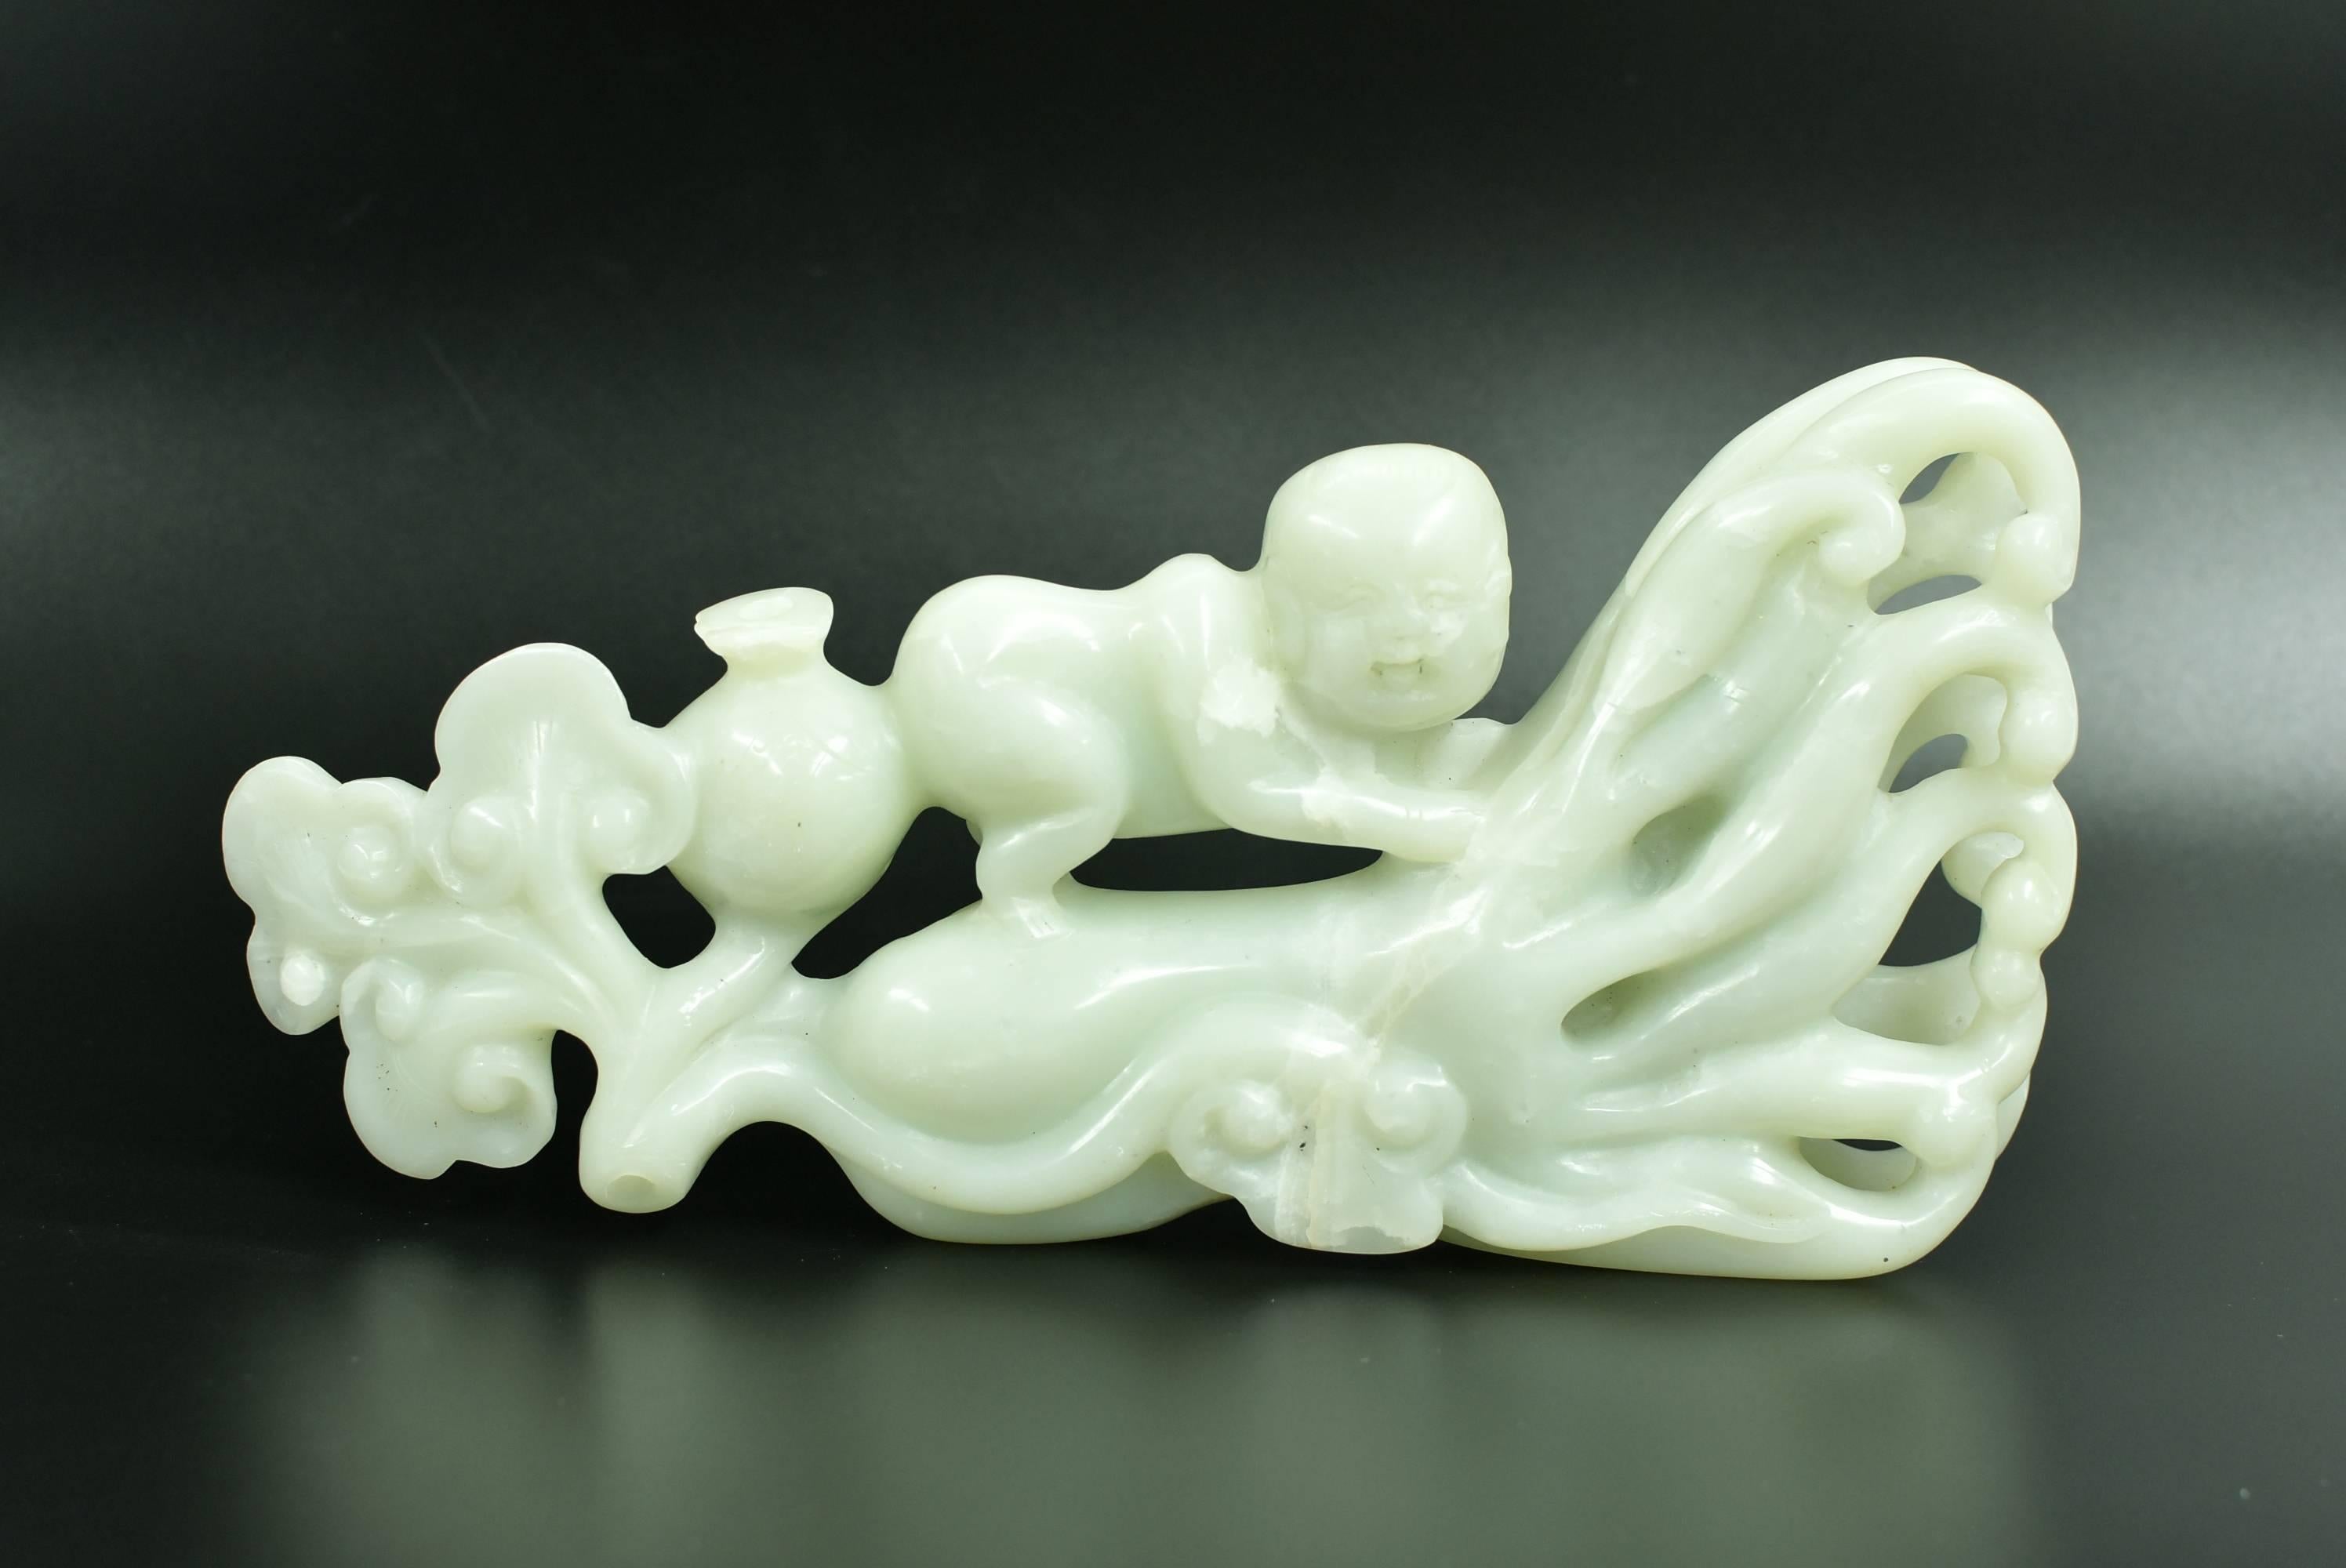 A large, all natural, celadon green nephrite jade sculpture, featuring an chubby baby perched on a citron and lin zhi. The statue has auspicious objects that are symbolic such as citron for great blessings, lin zhi for good health and long life,